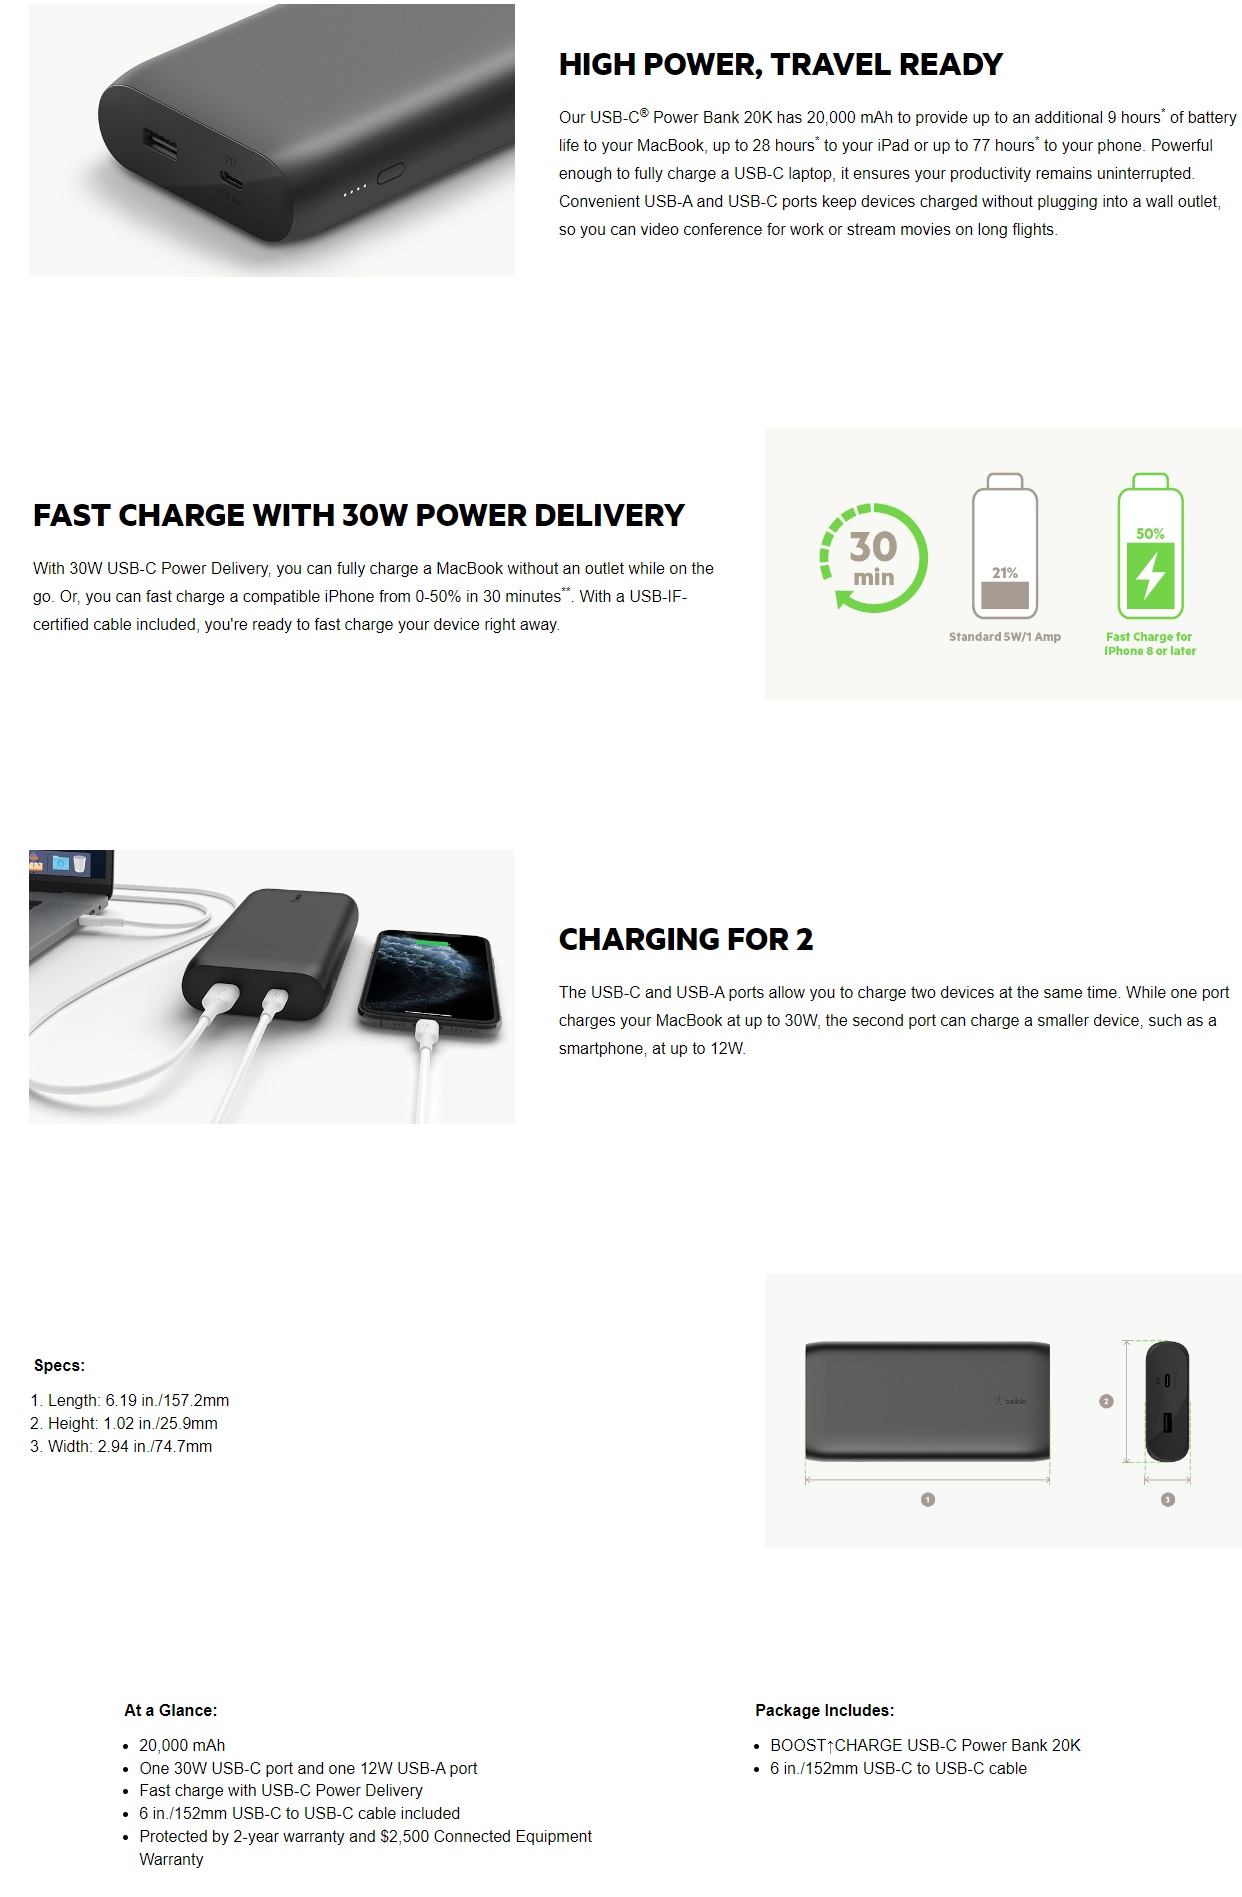 Belkin BoostCharge USB-C PD Power Bank 20K - White (BPB002btWT), 6 in. USB-C to USB-C cable included,Dual Port with 30W USB-C PD